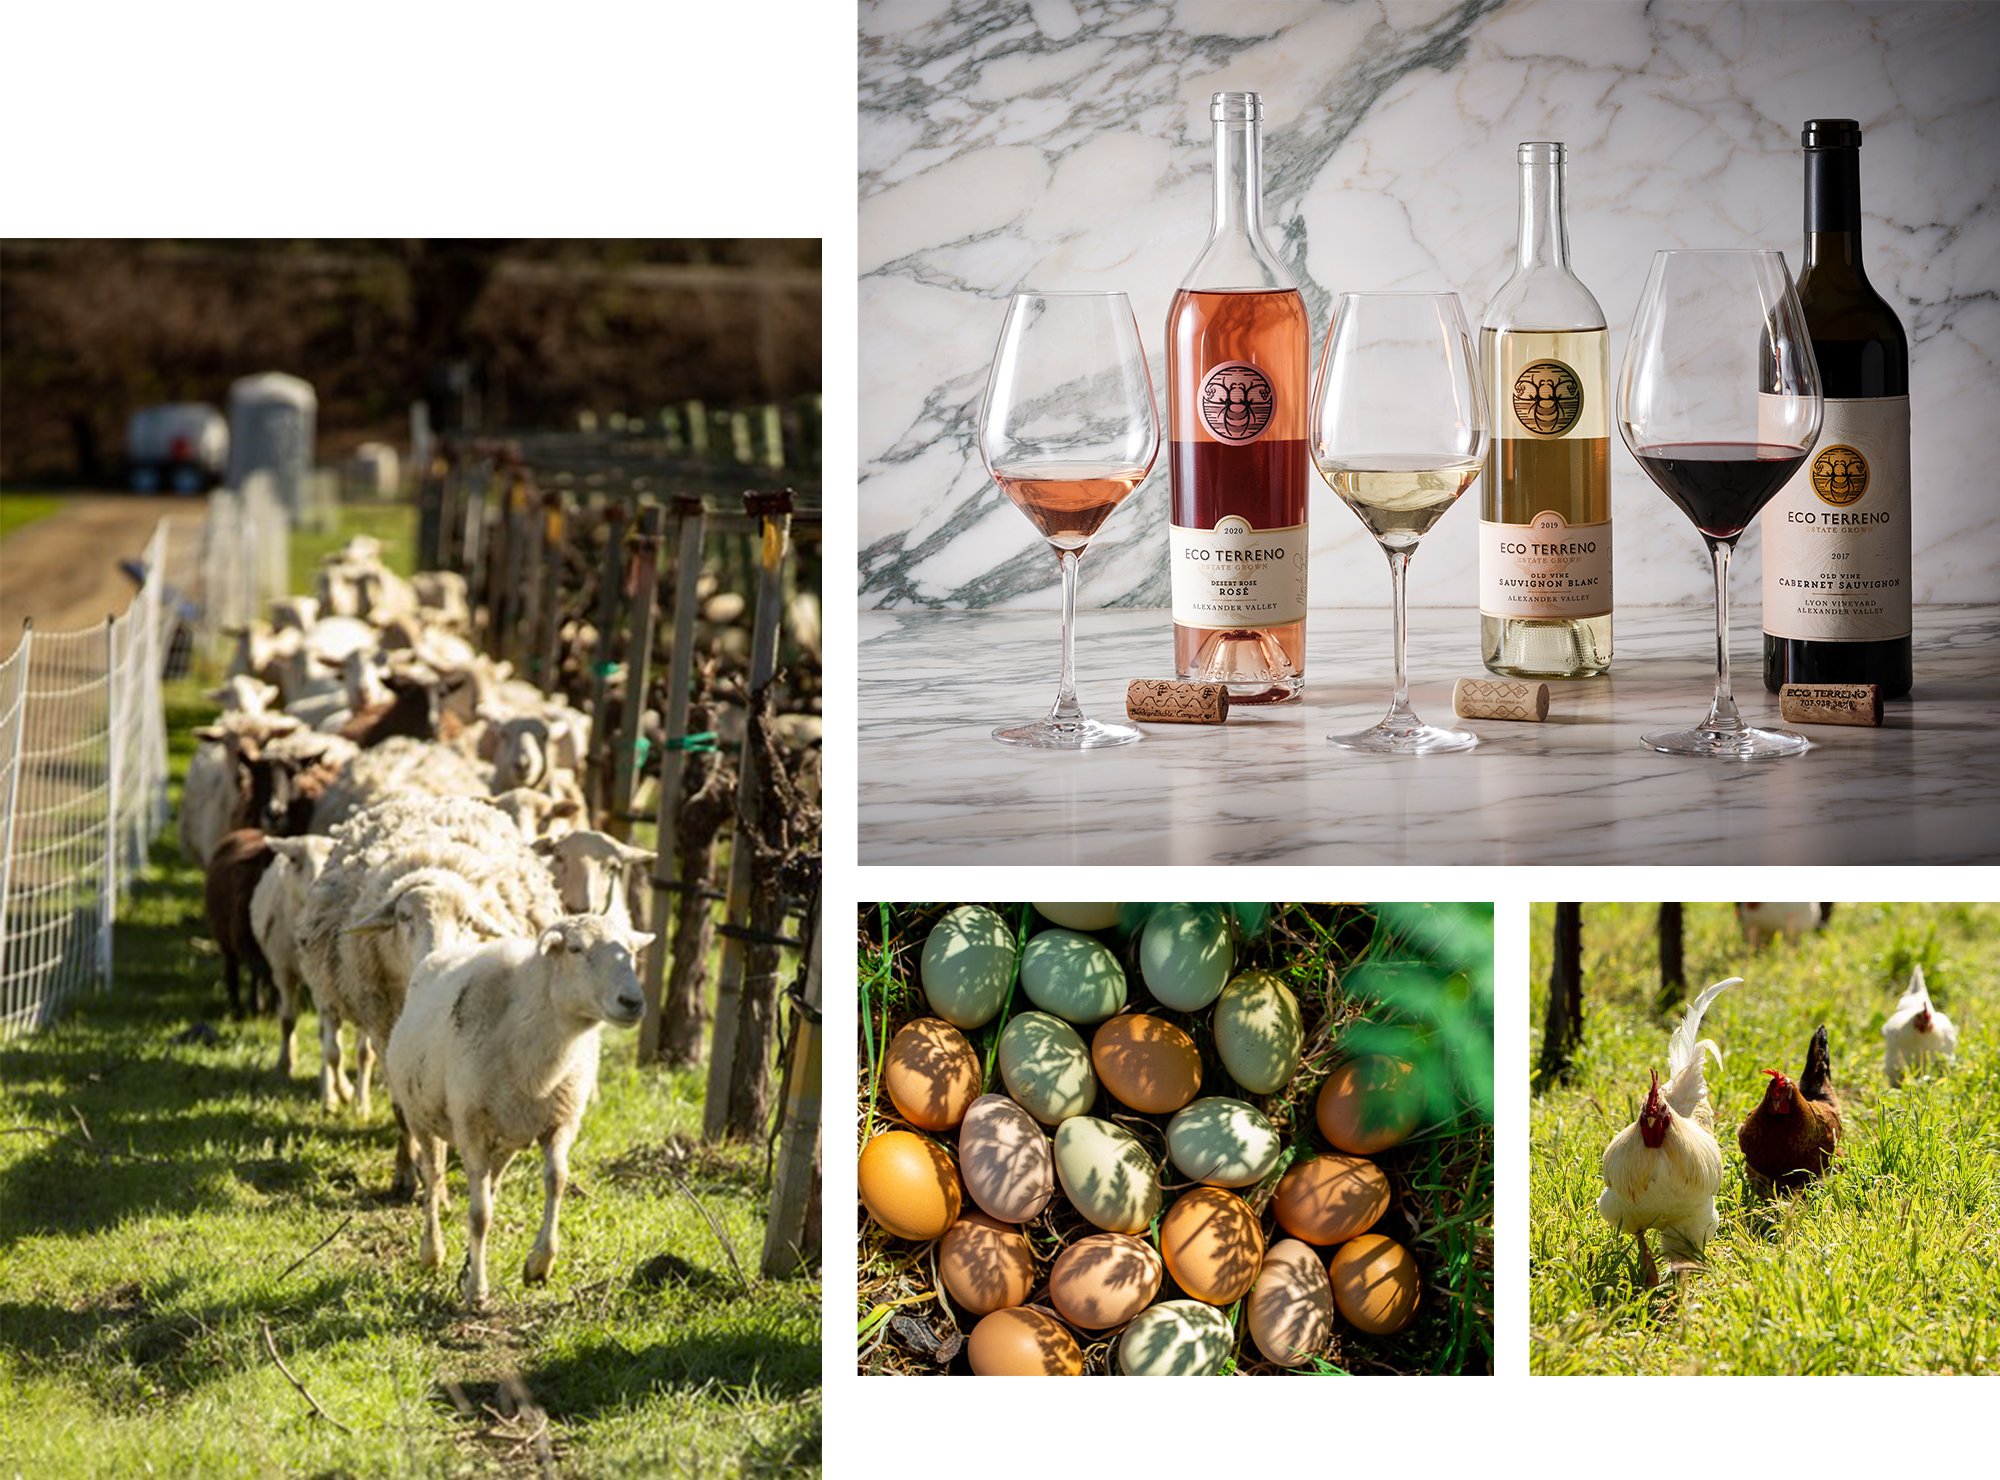 Four images: One of a herd of goats; one of a group of free ranging chickens; a group of multi-colored eggs under a bush; and, a counter with three bottles of wine.